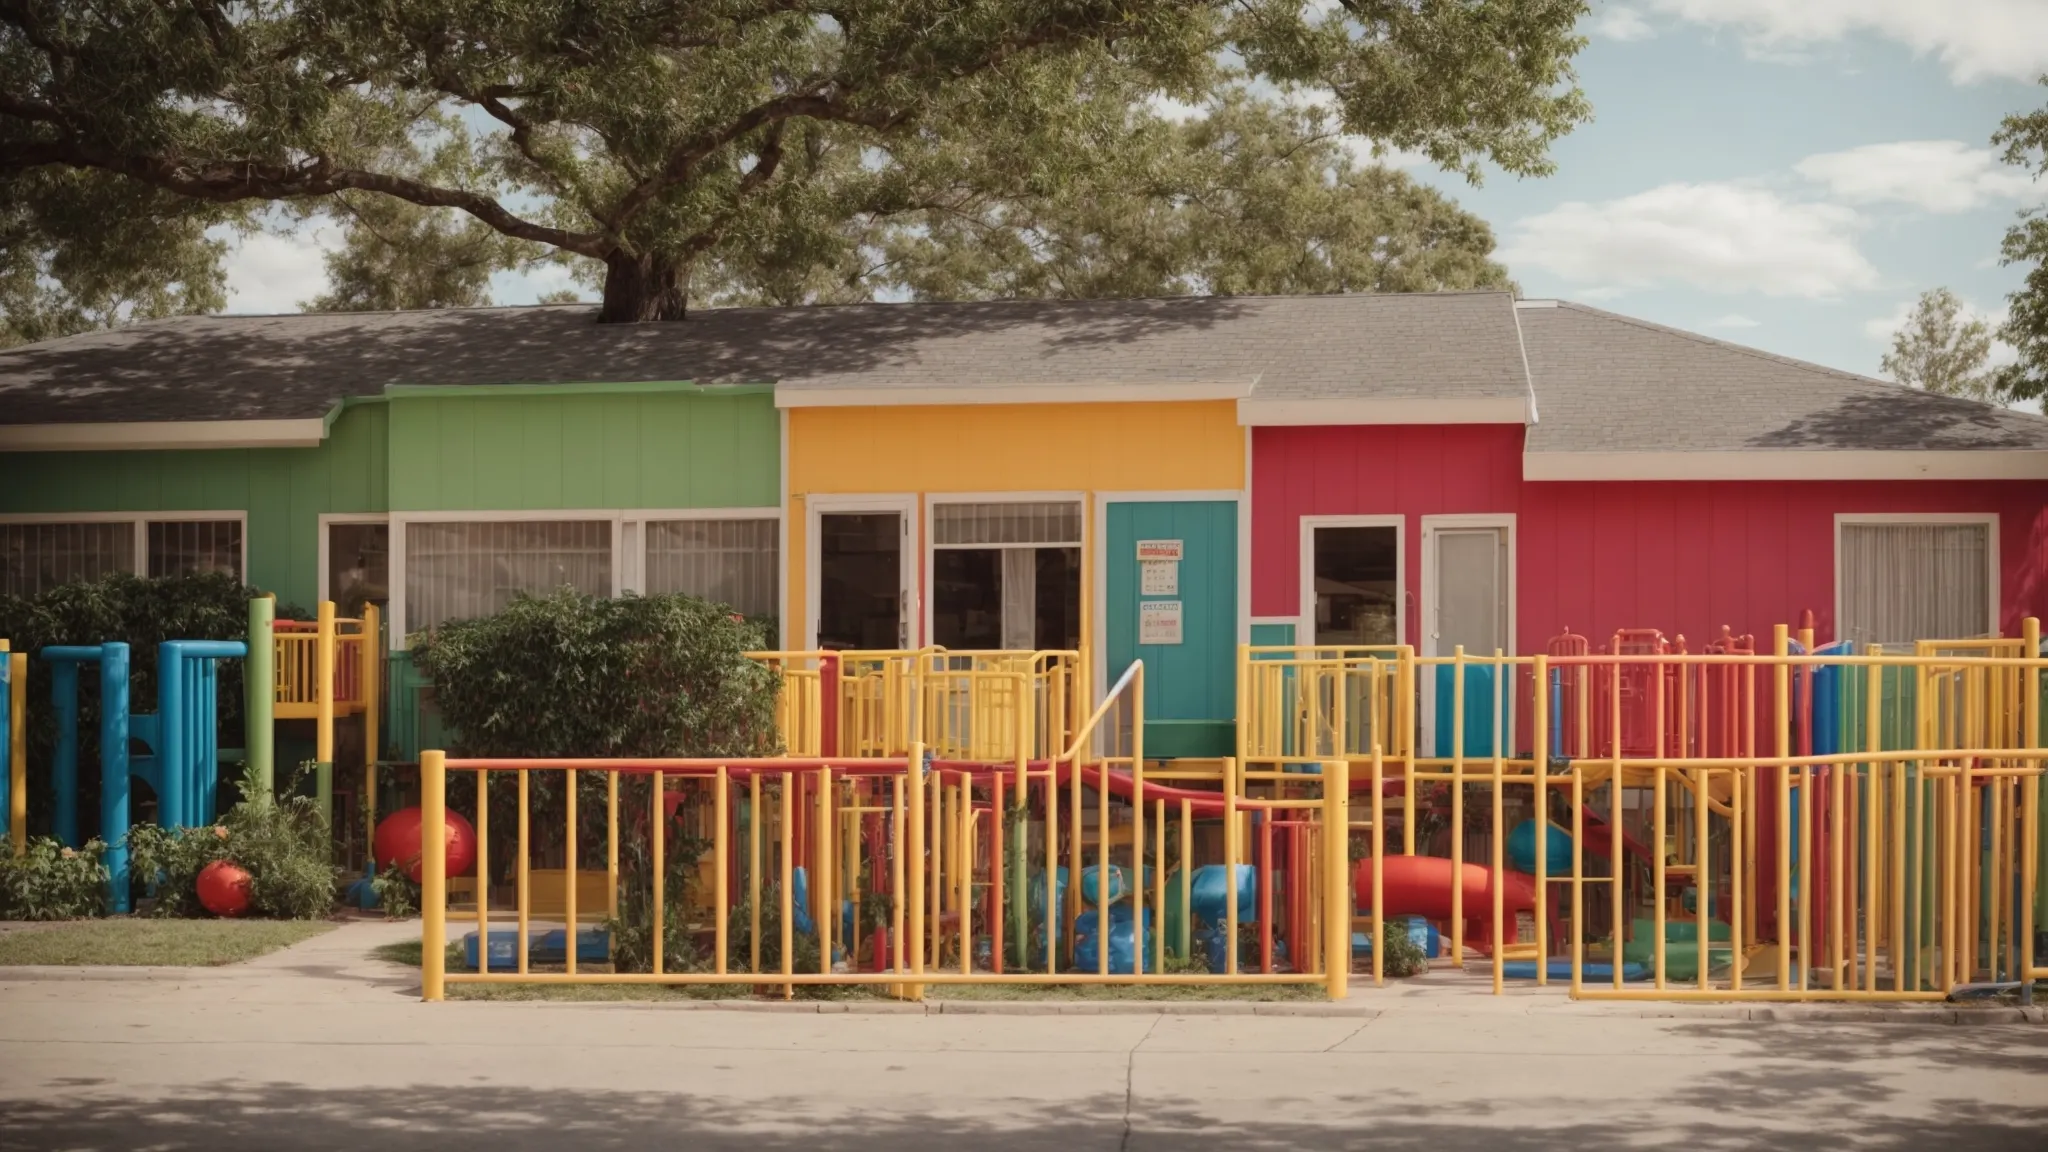 a daycare center facade with a colorful playground visible from the street, inviting local families to visit.